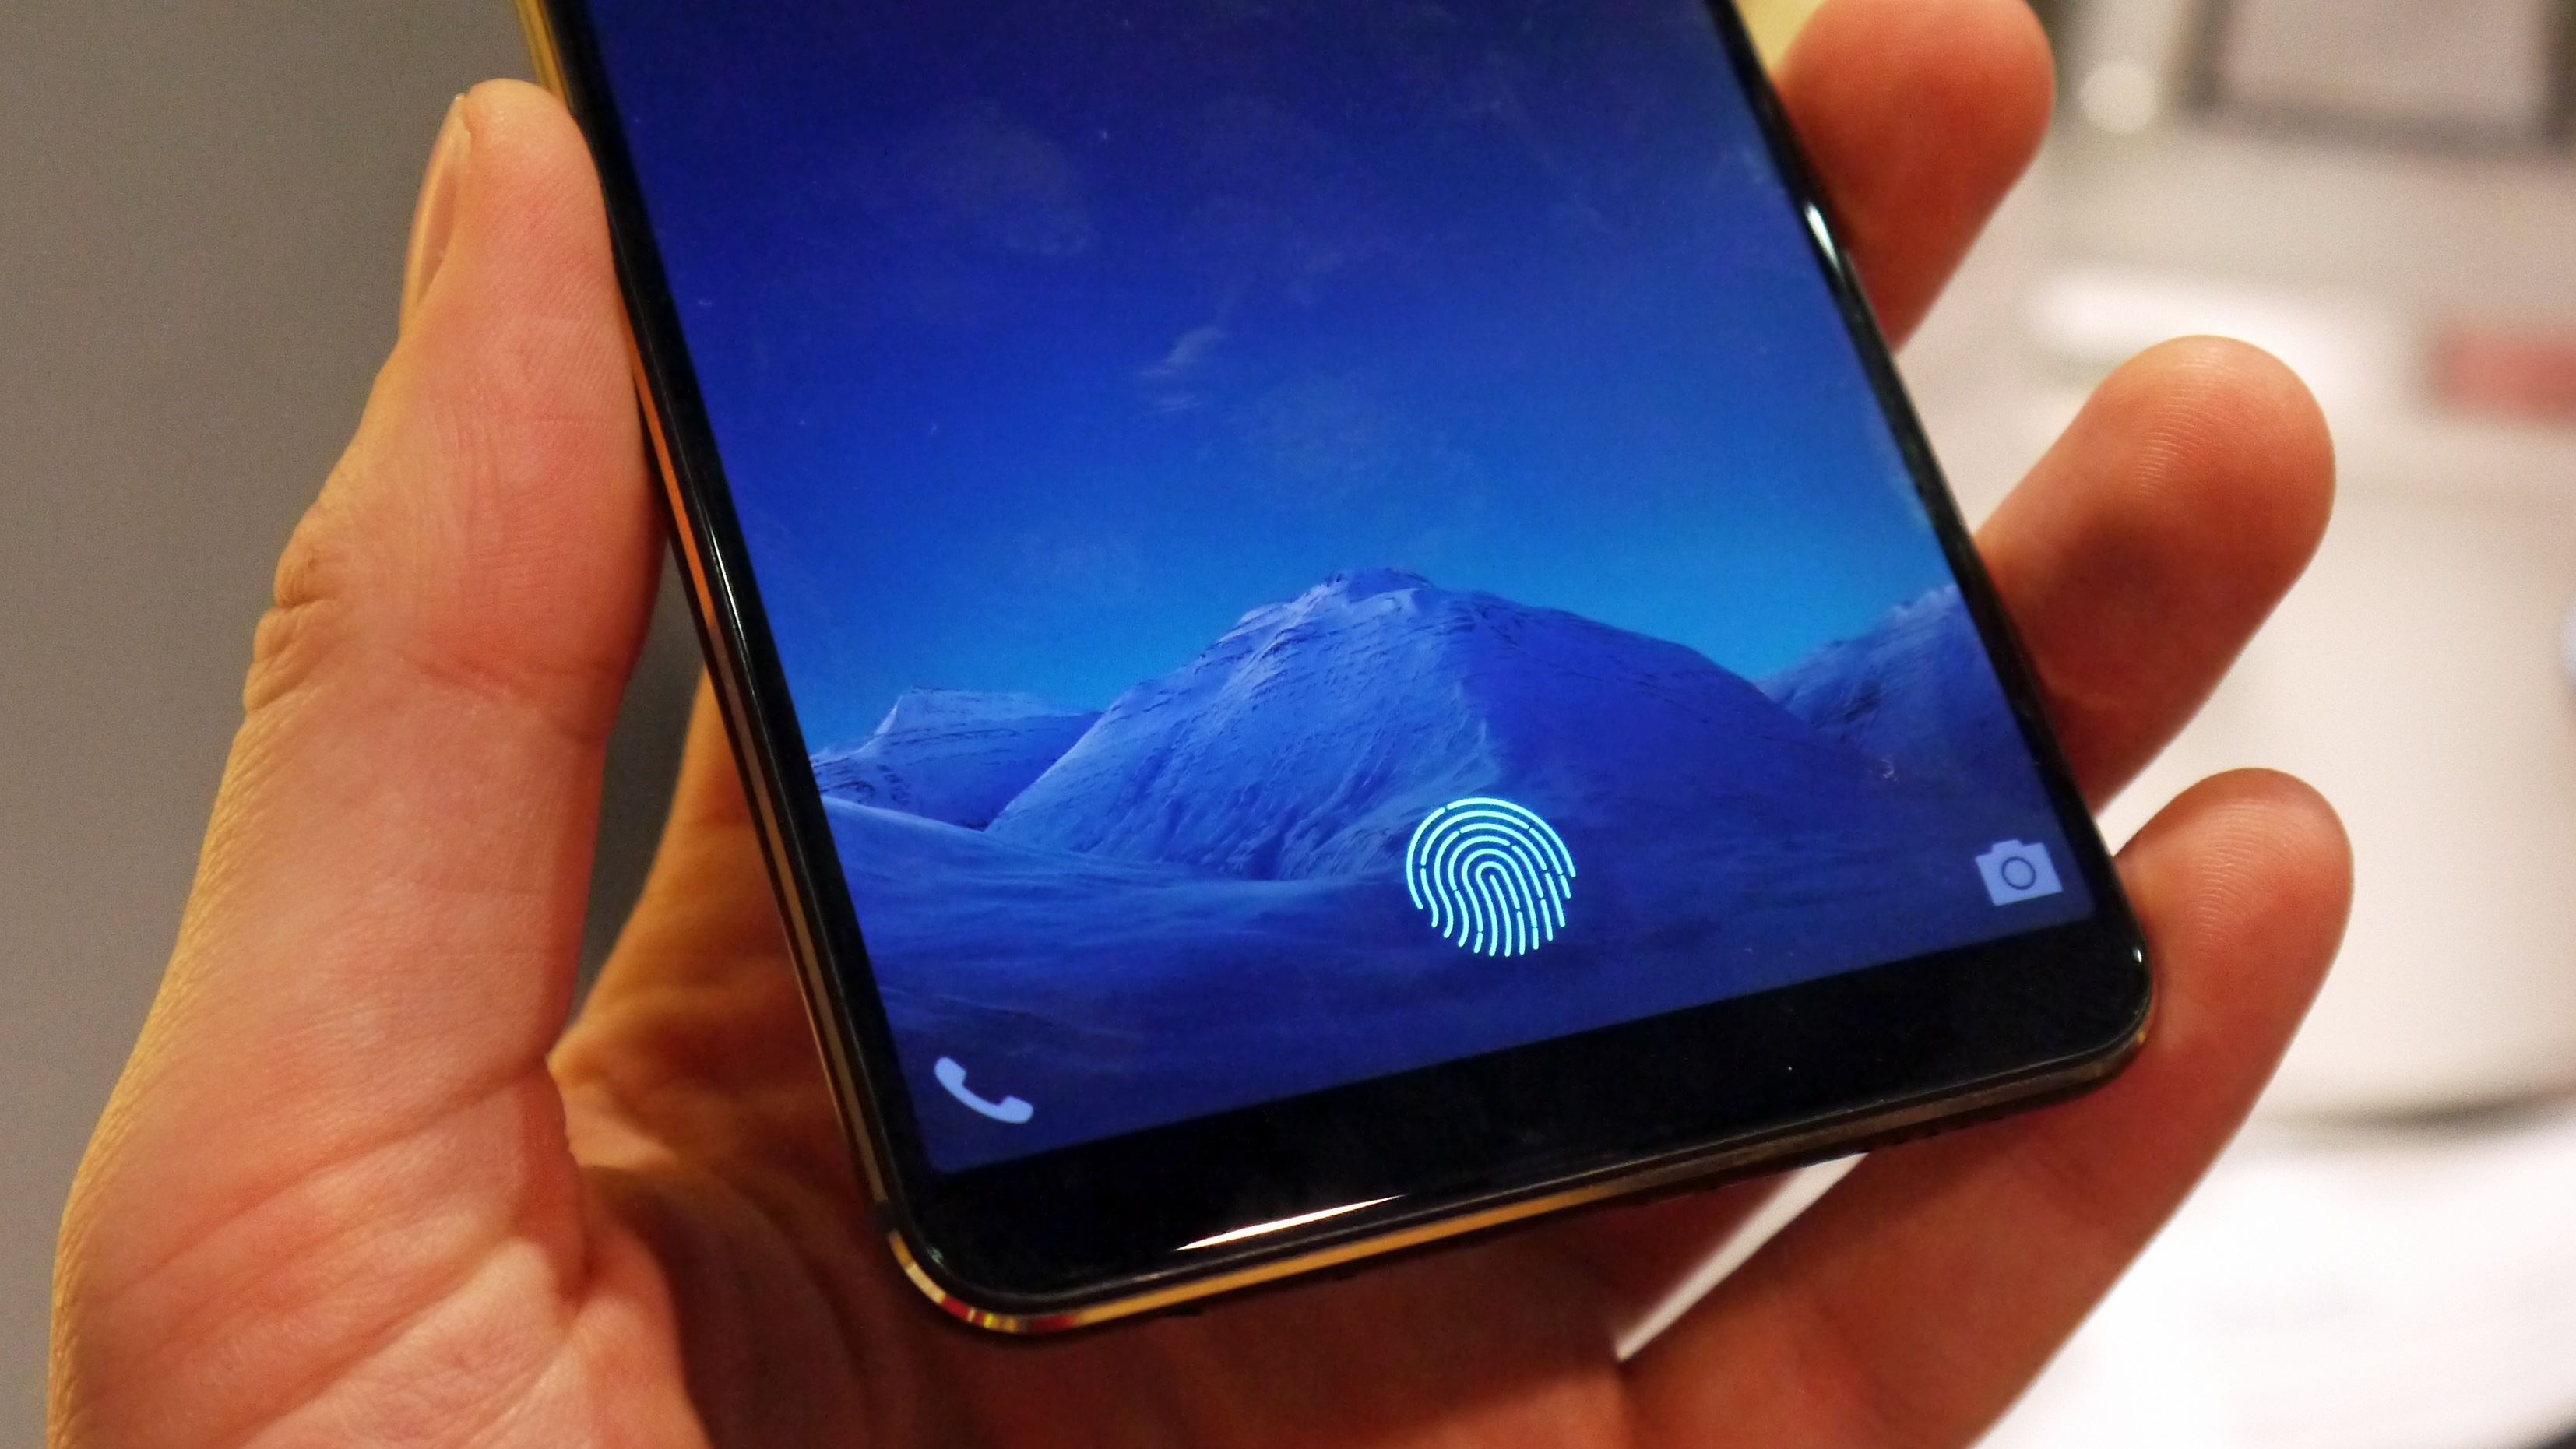 The world's first smartphone with an in-display fingerprint scanner